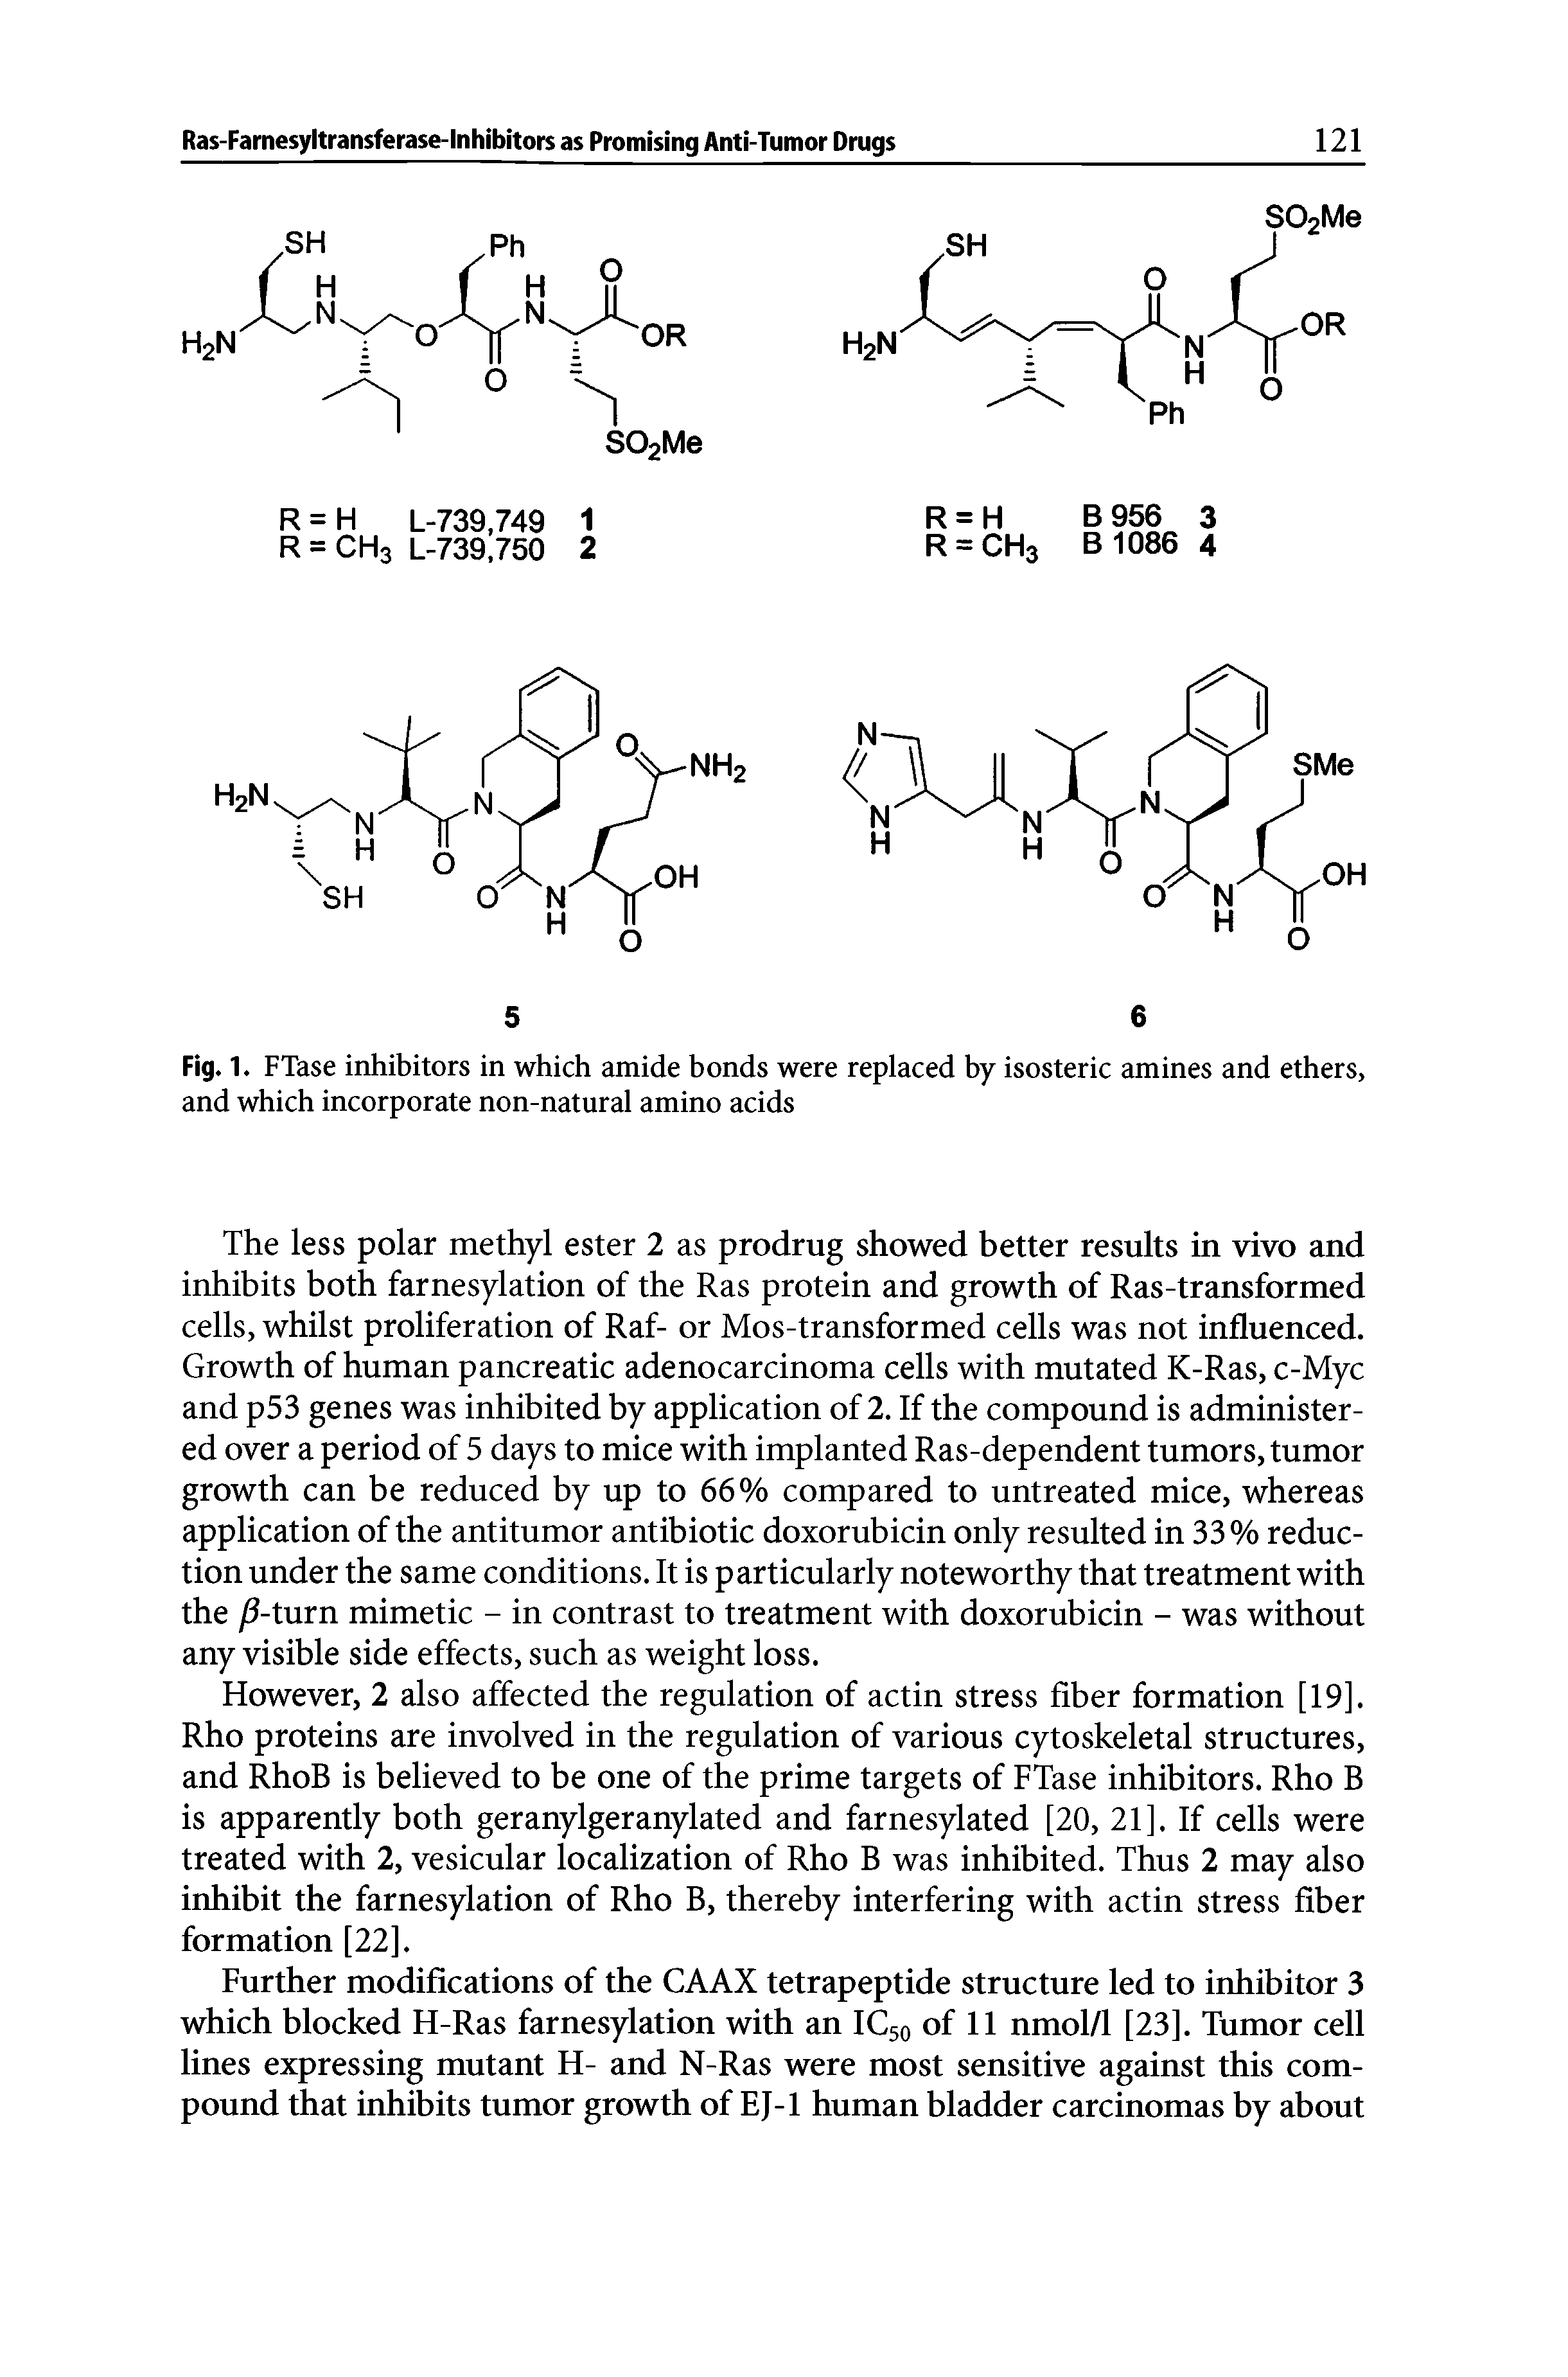 Fig. 1. FTase inhibitors in which amide bonds were replaced by isosteric amines and ethers, and which incorporate non-natural amino acids...